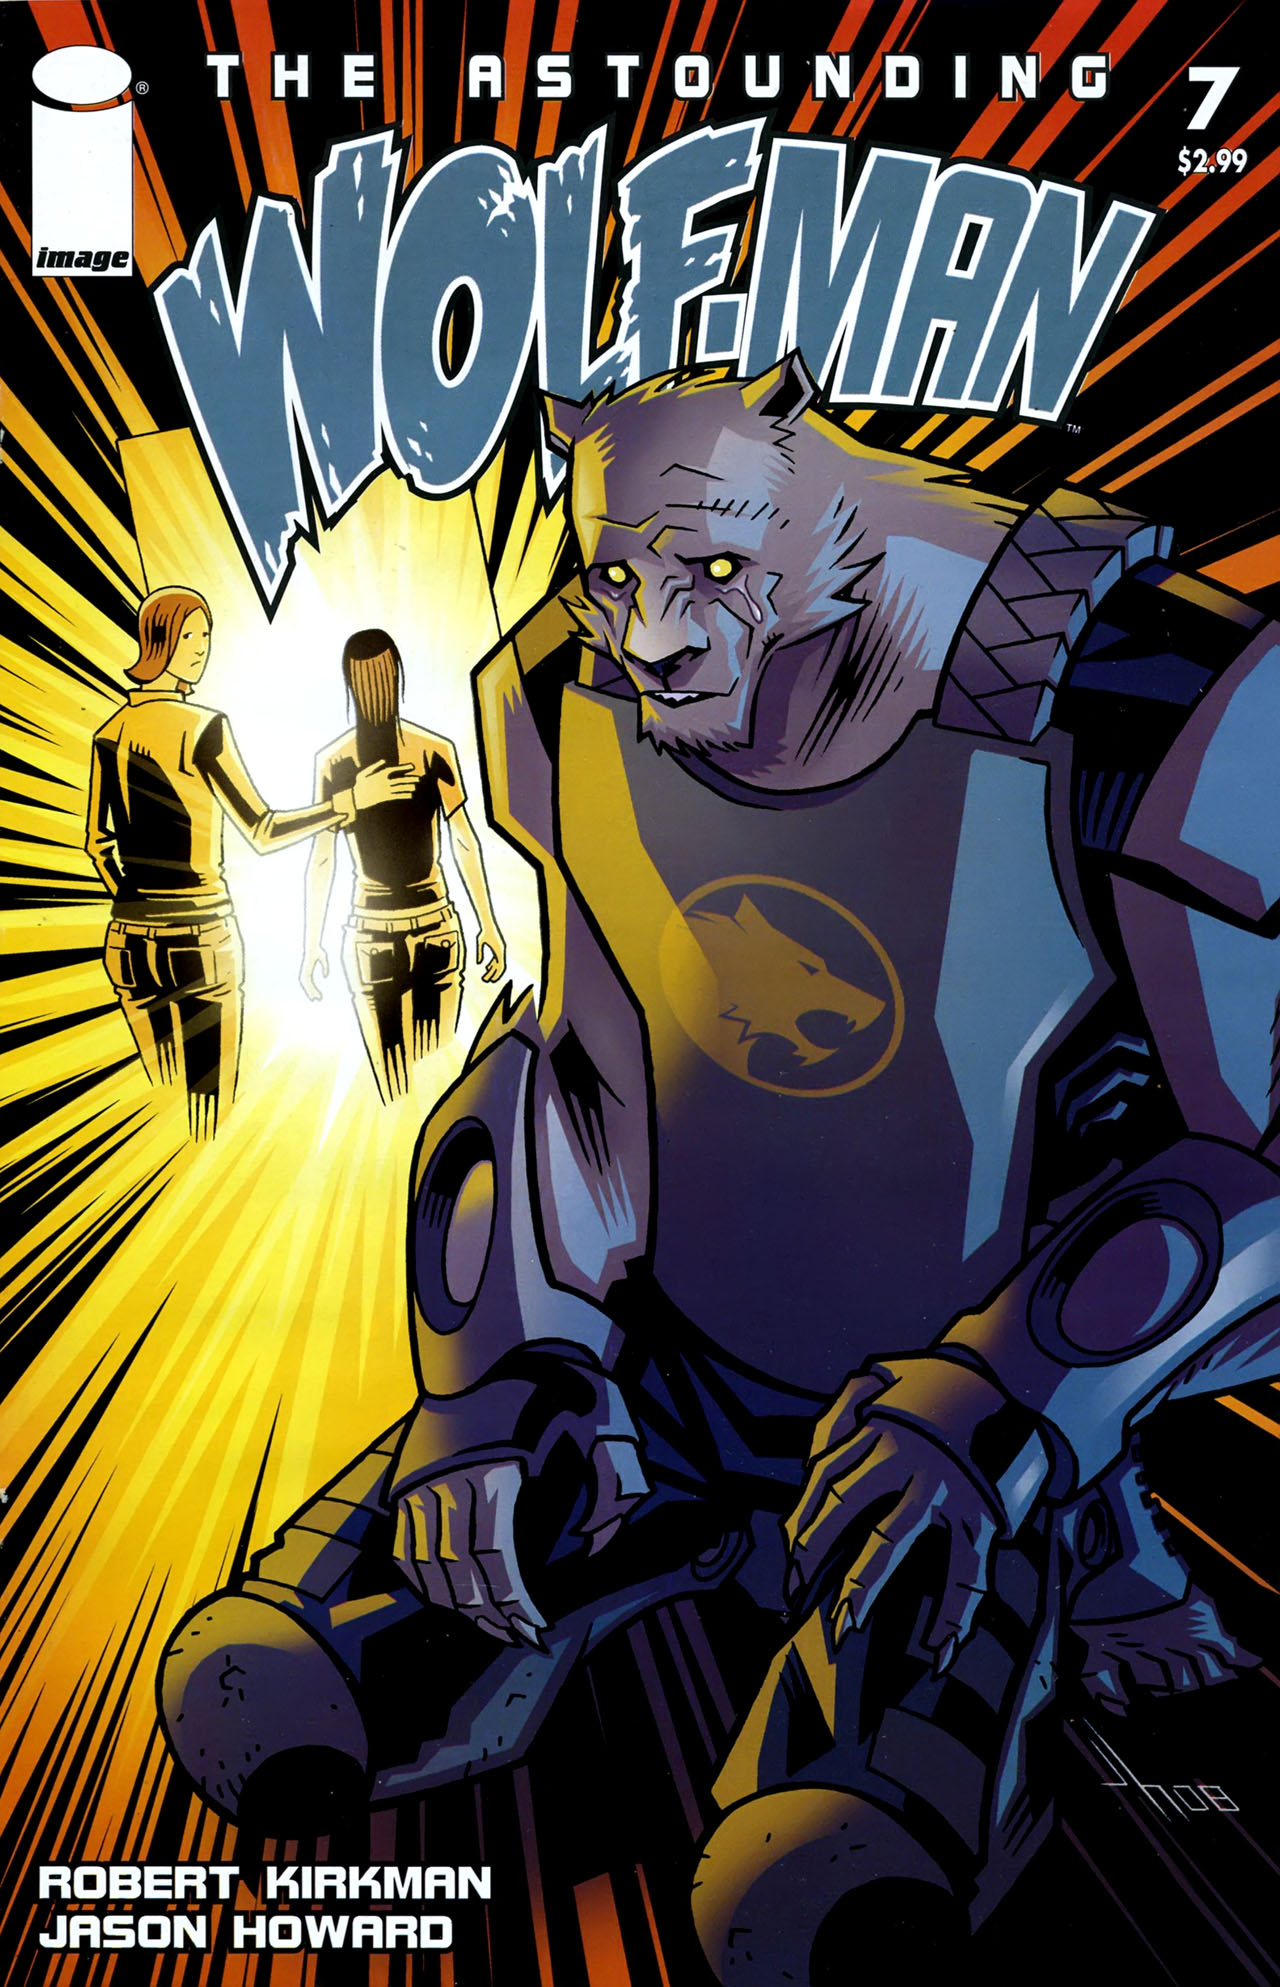 Read online The Astounding Wolf-Man comic -  Issue #7 - 1